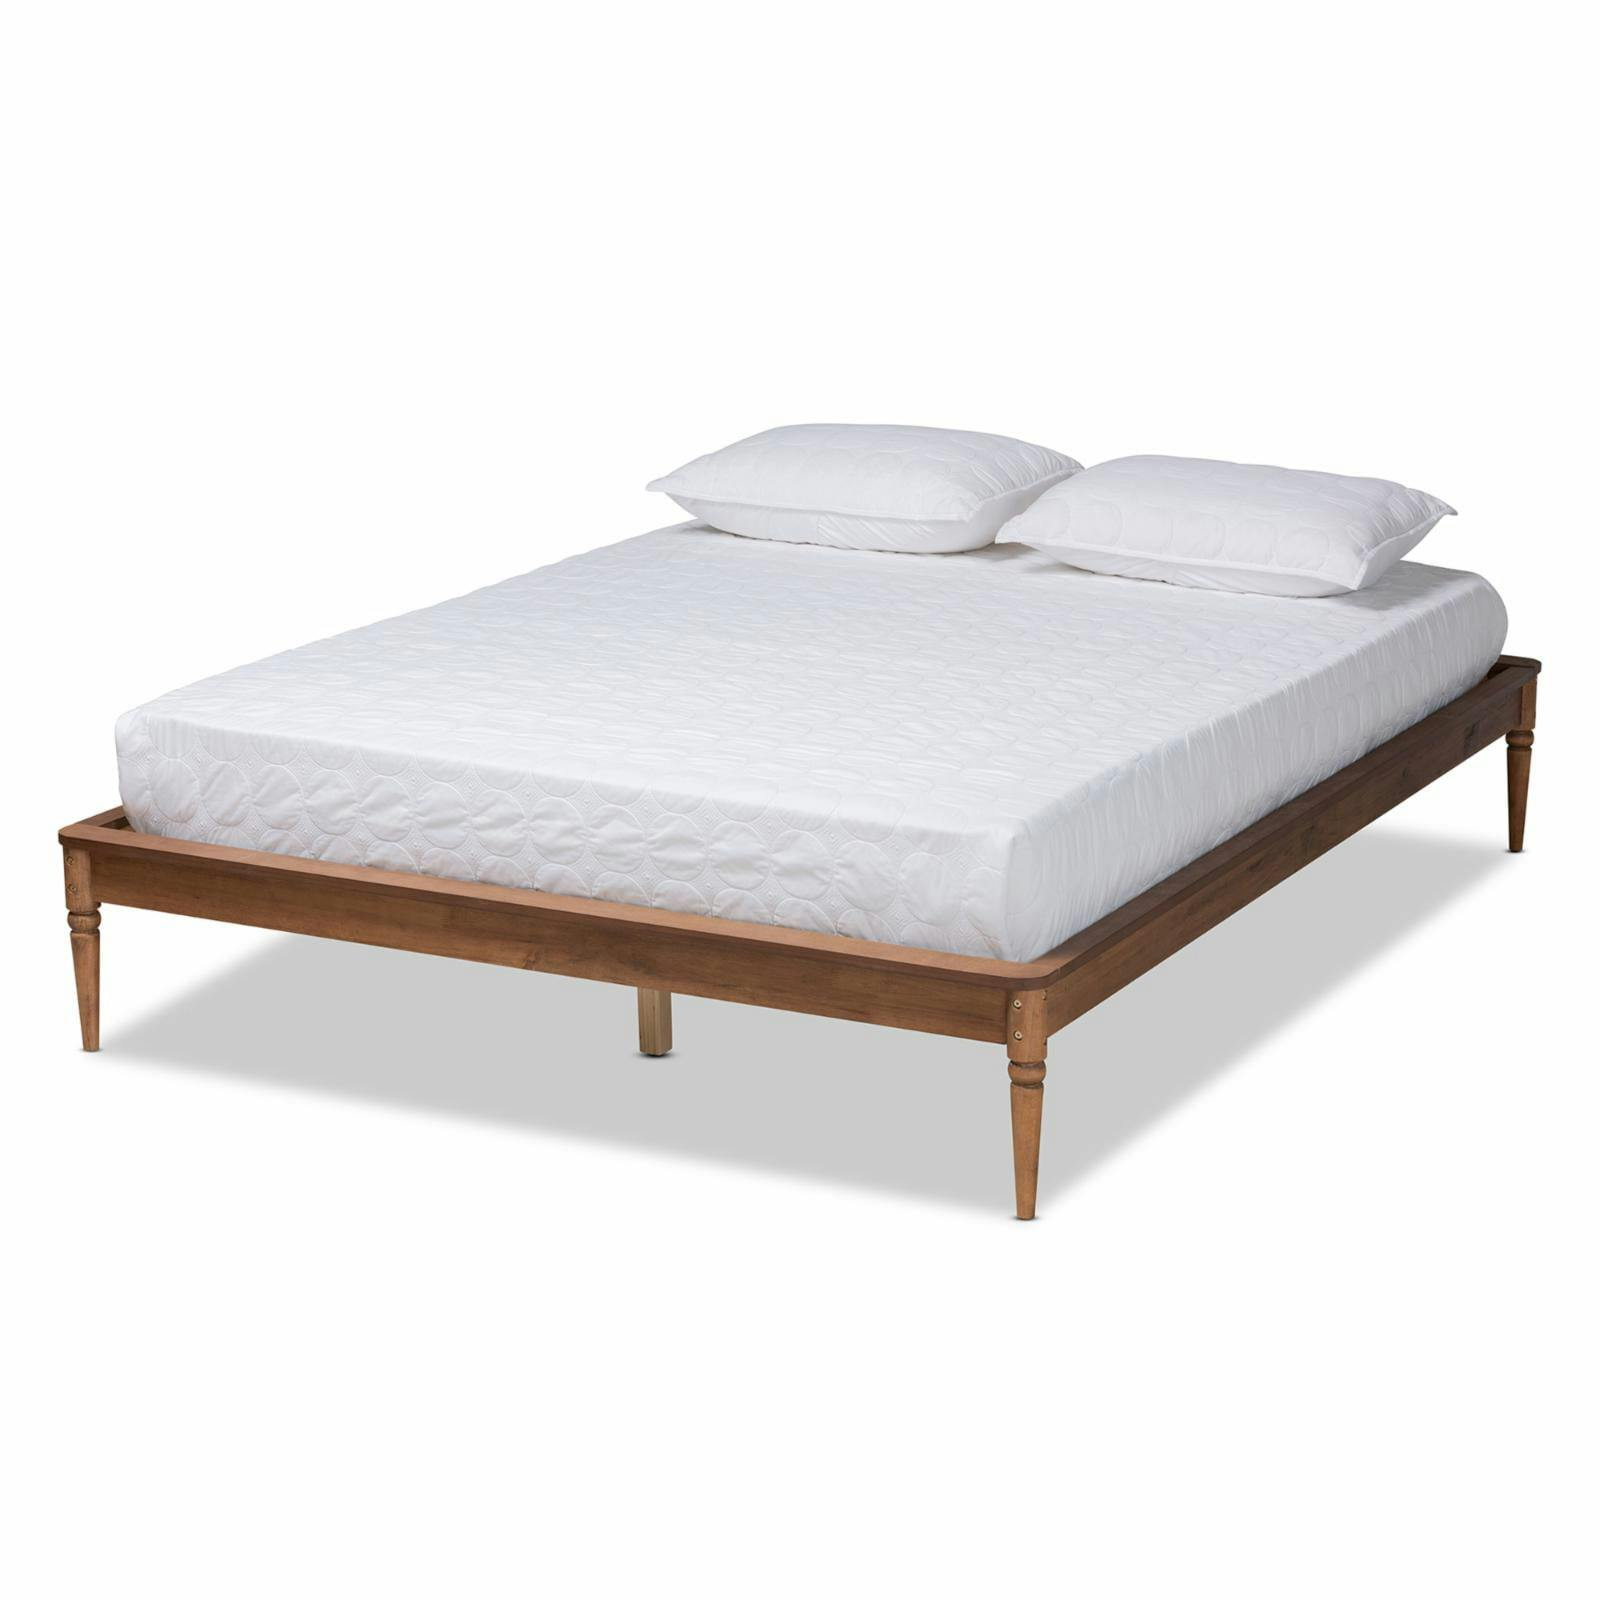 Tallis Traditional Walnut Wood Queen Bed Frame with Tufted Upholstery